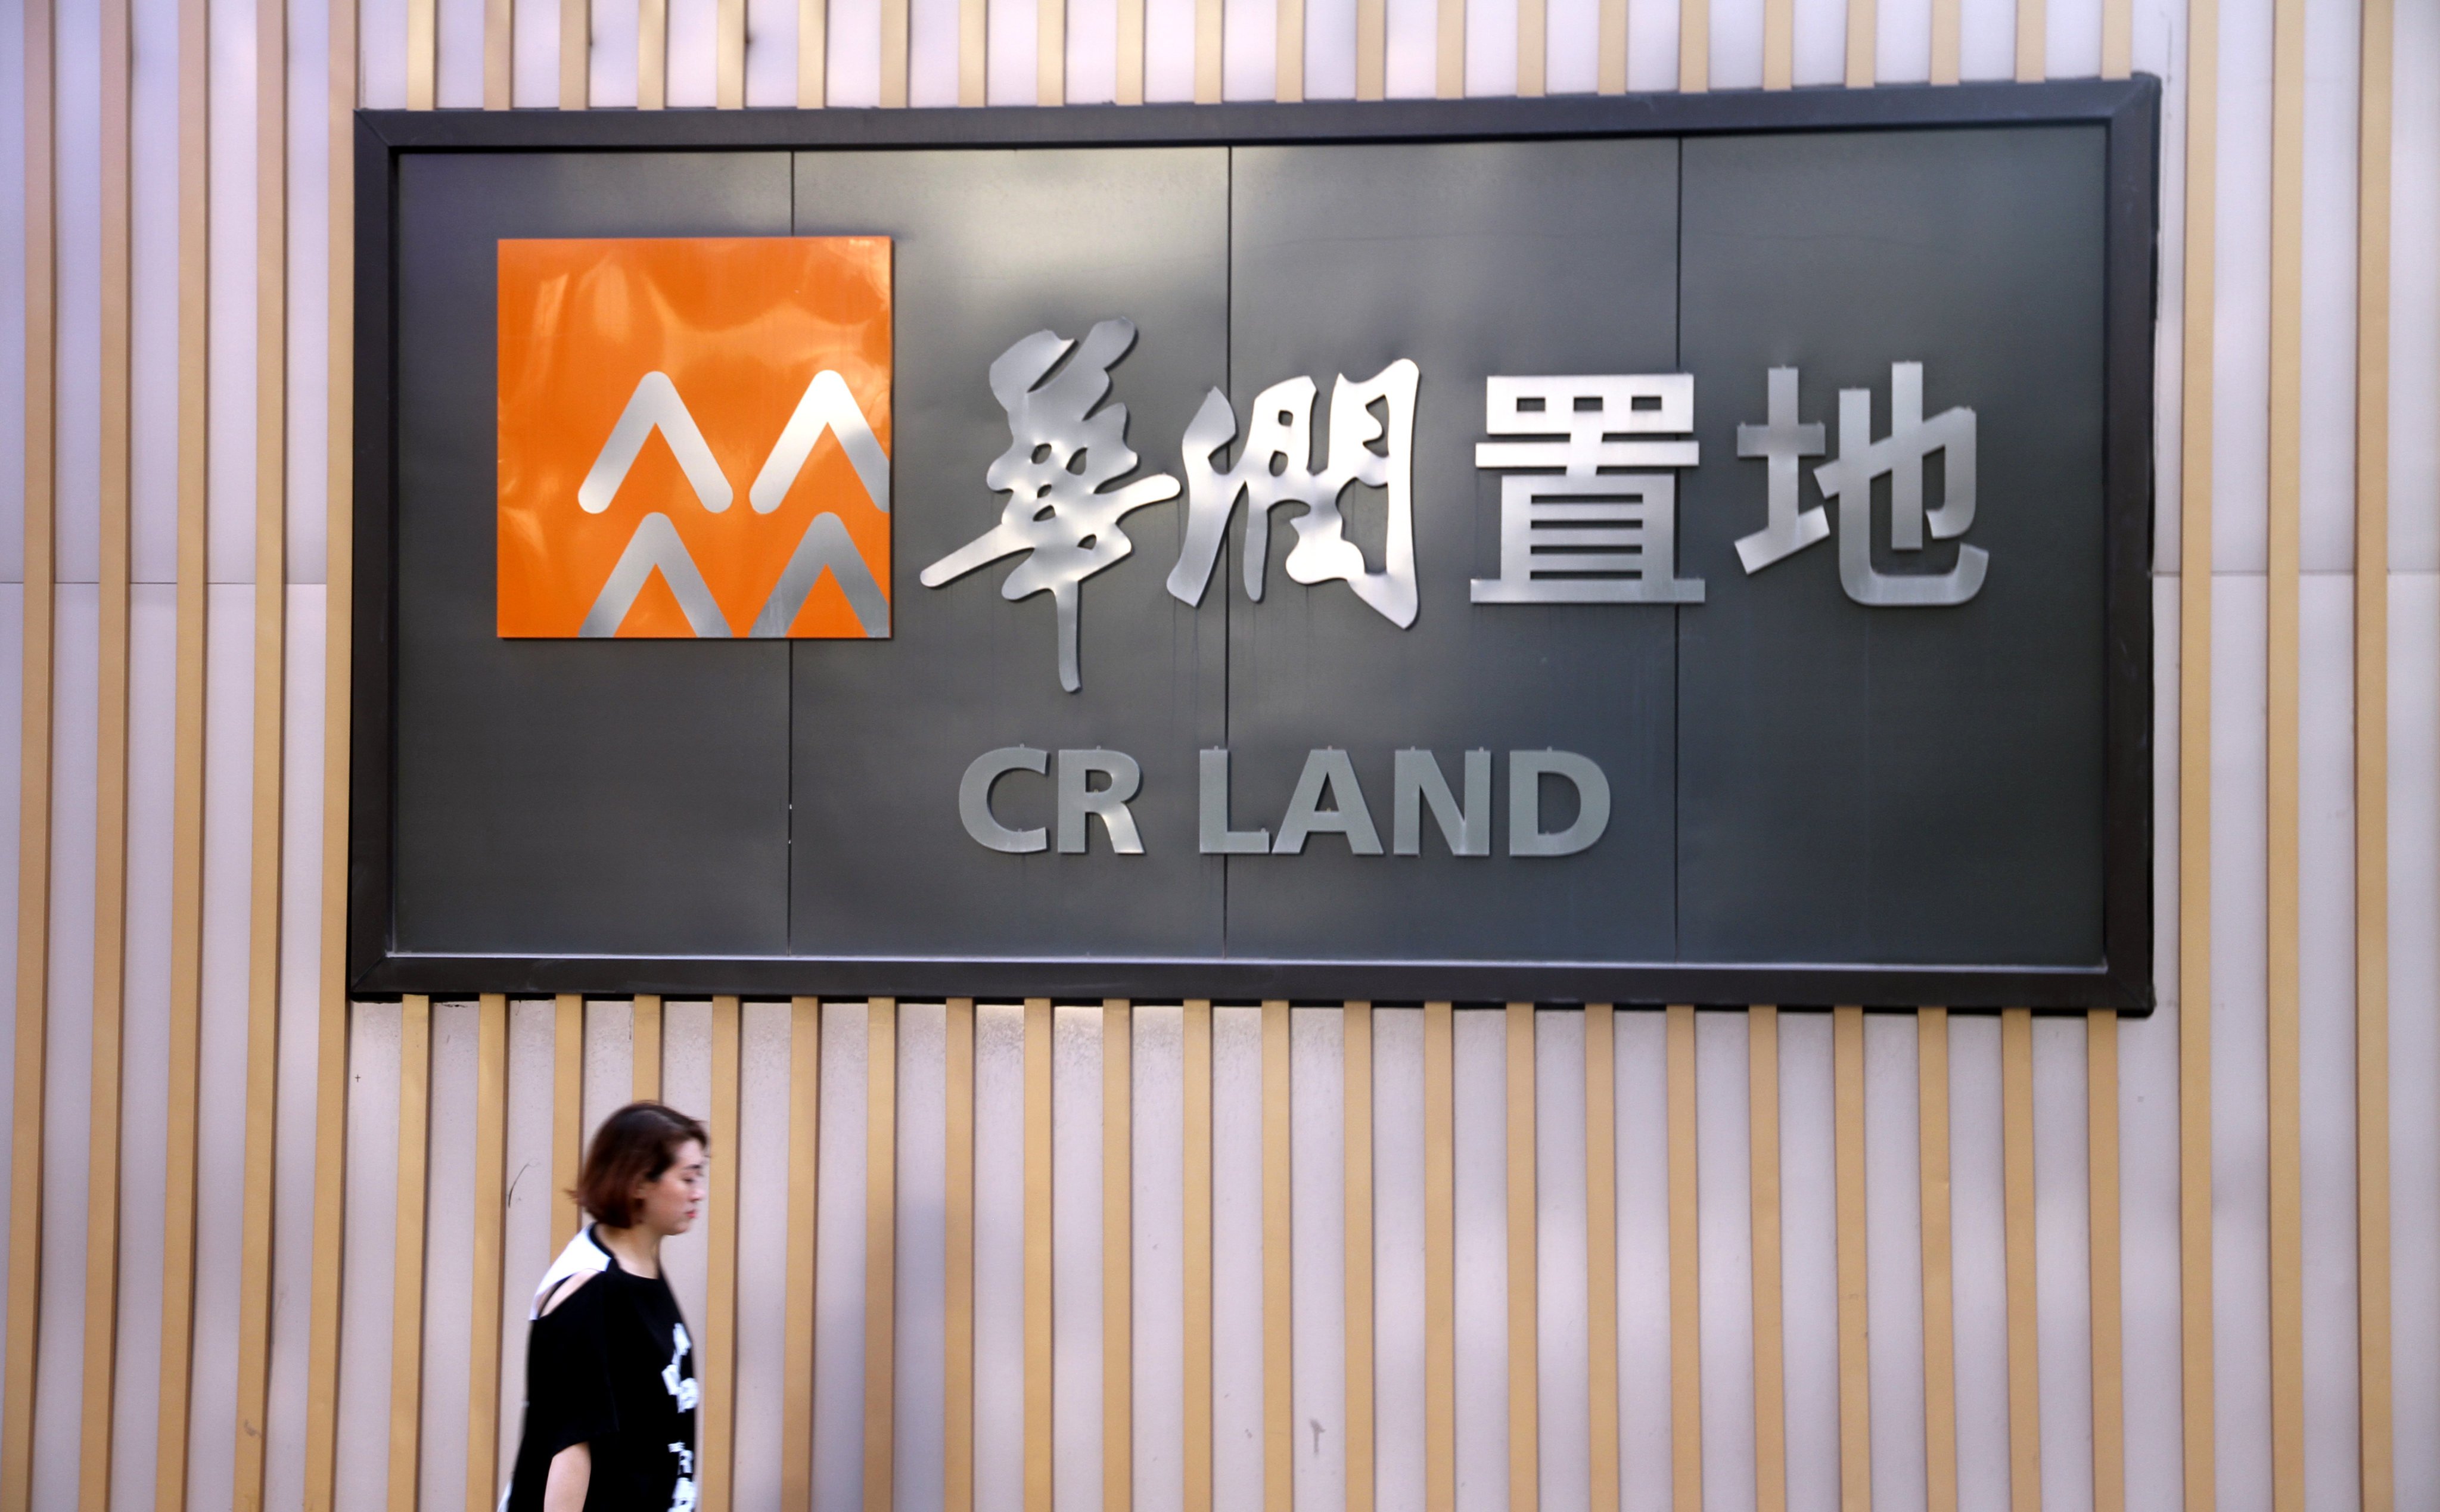 A general view of China Resources Land Limited (CR Land) logo in Chongqing, China. Photo: Getty Images